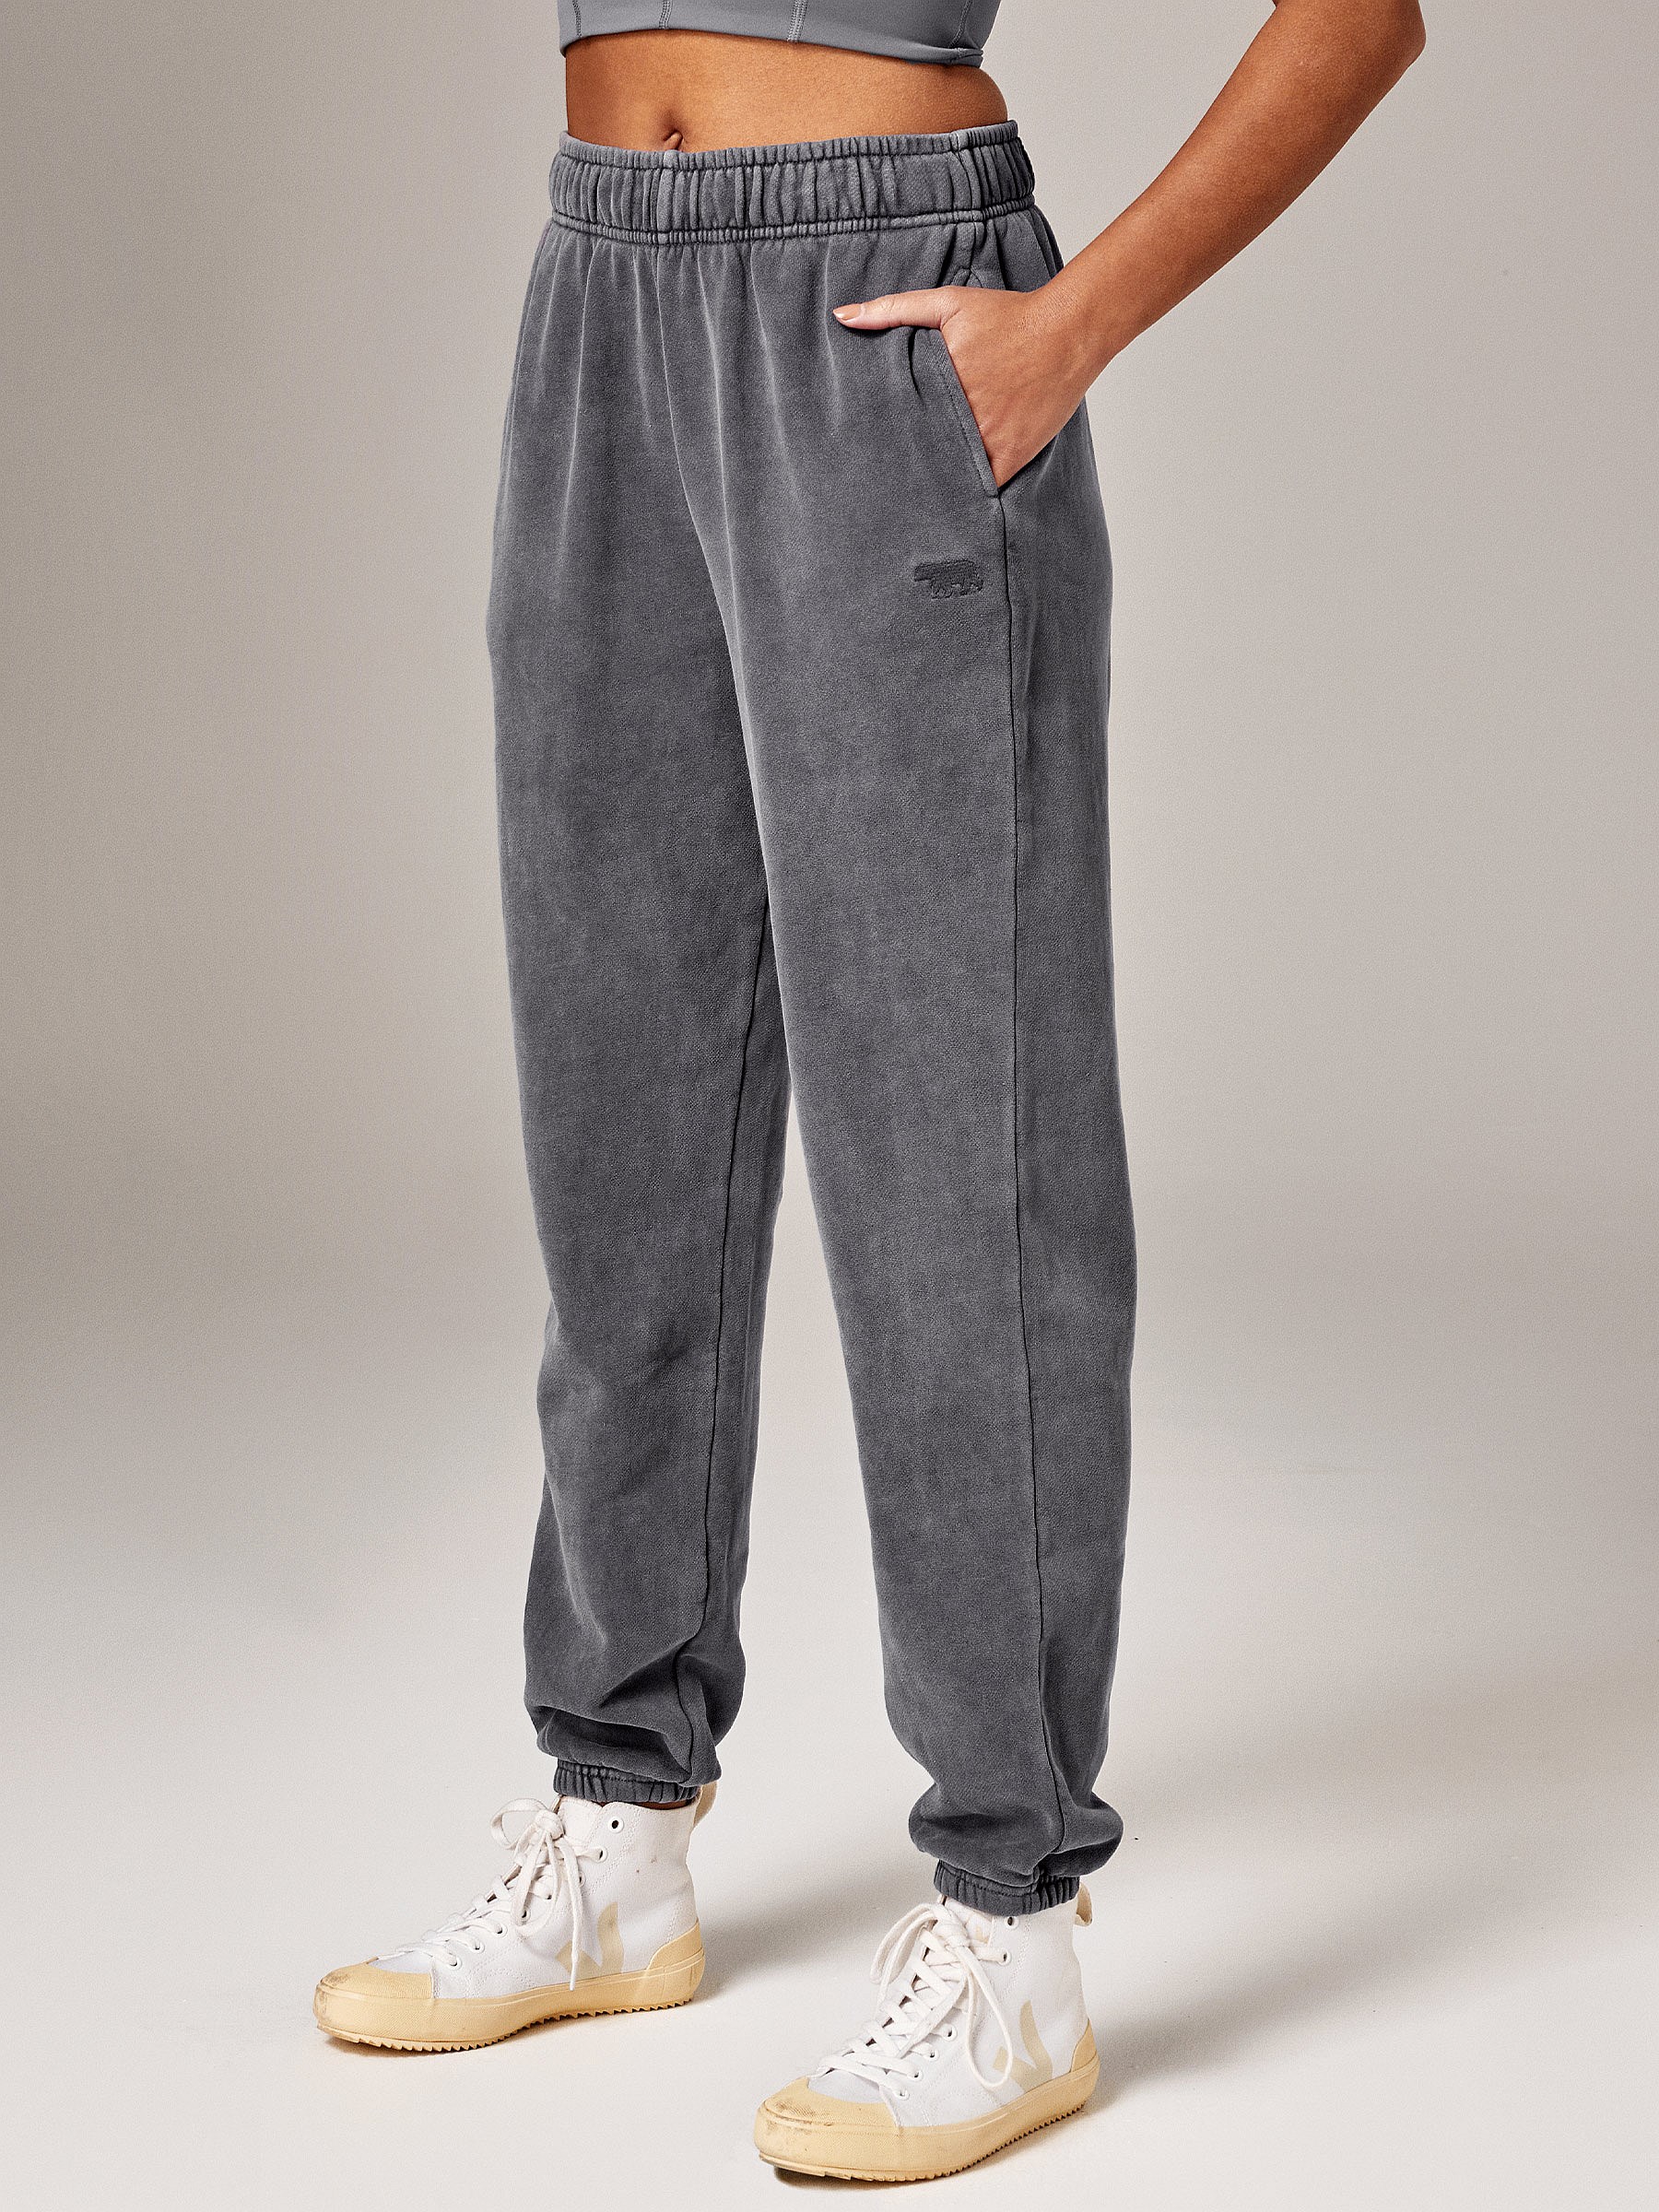 Womens Activewear Sweatpants. Running Bare Legacy Trackpants